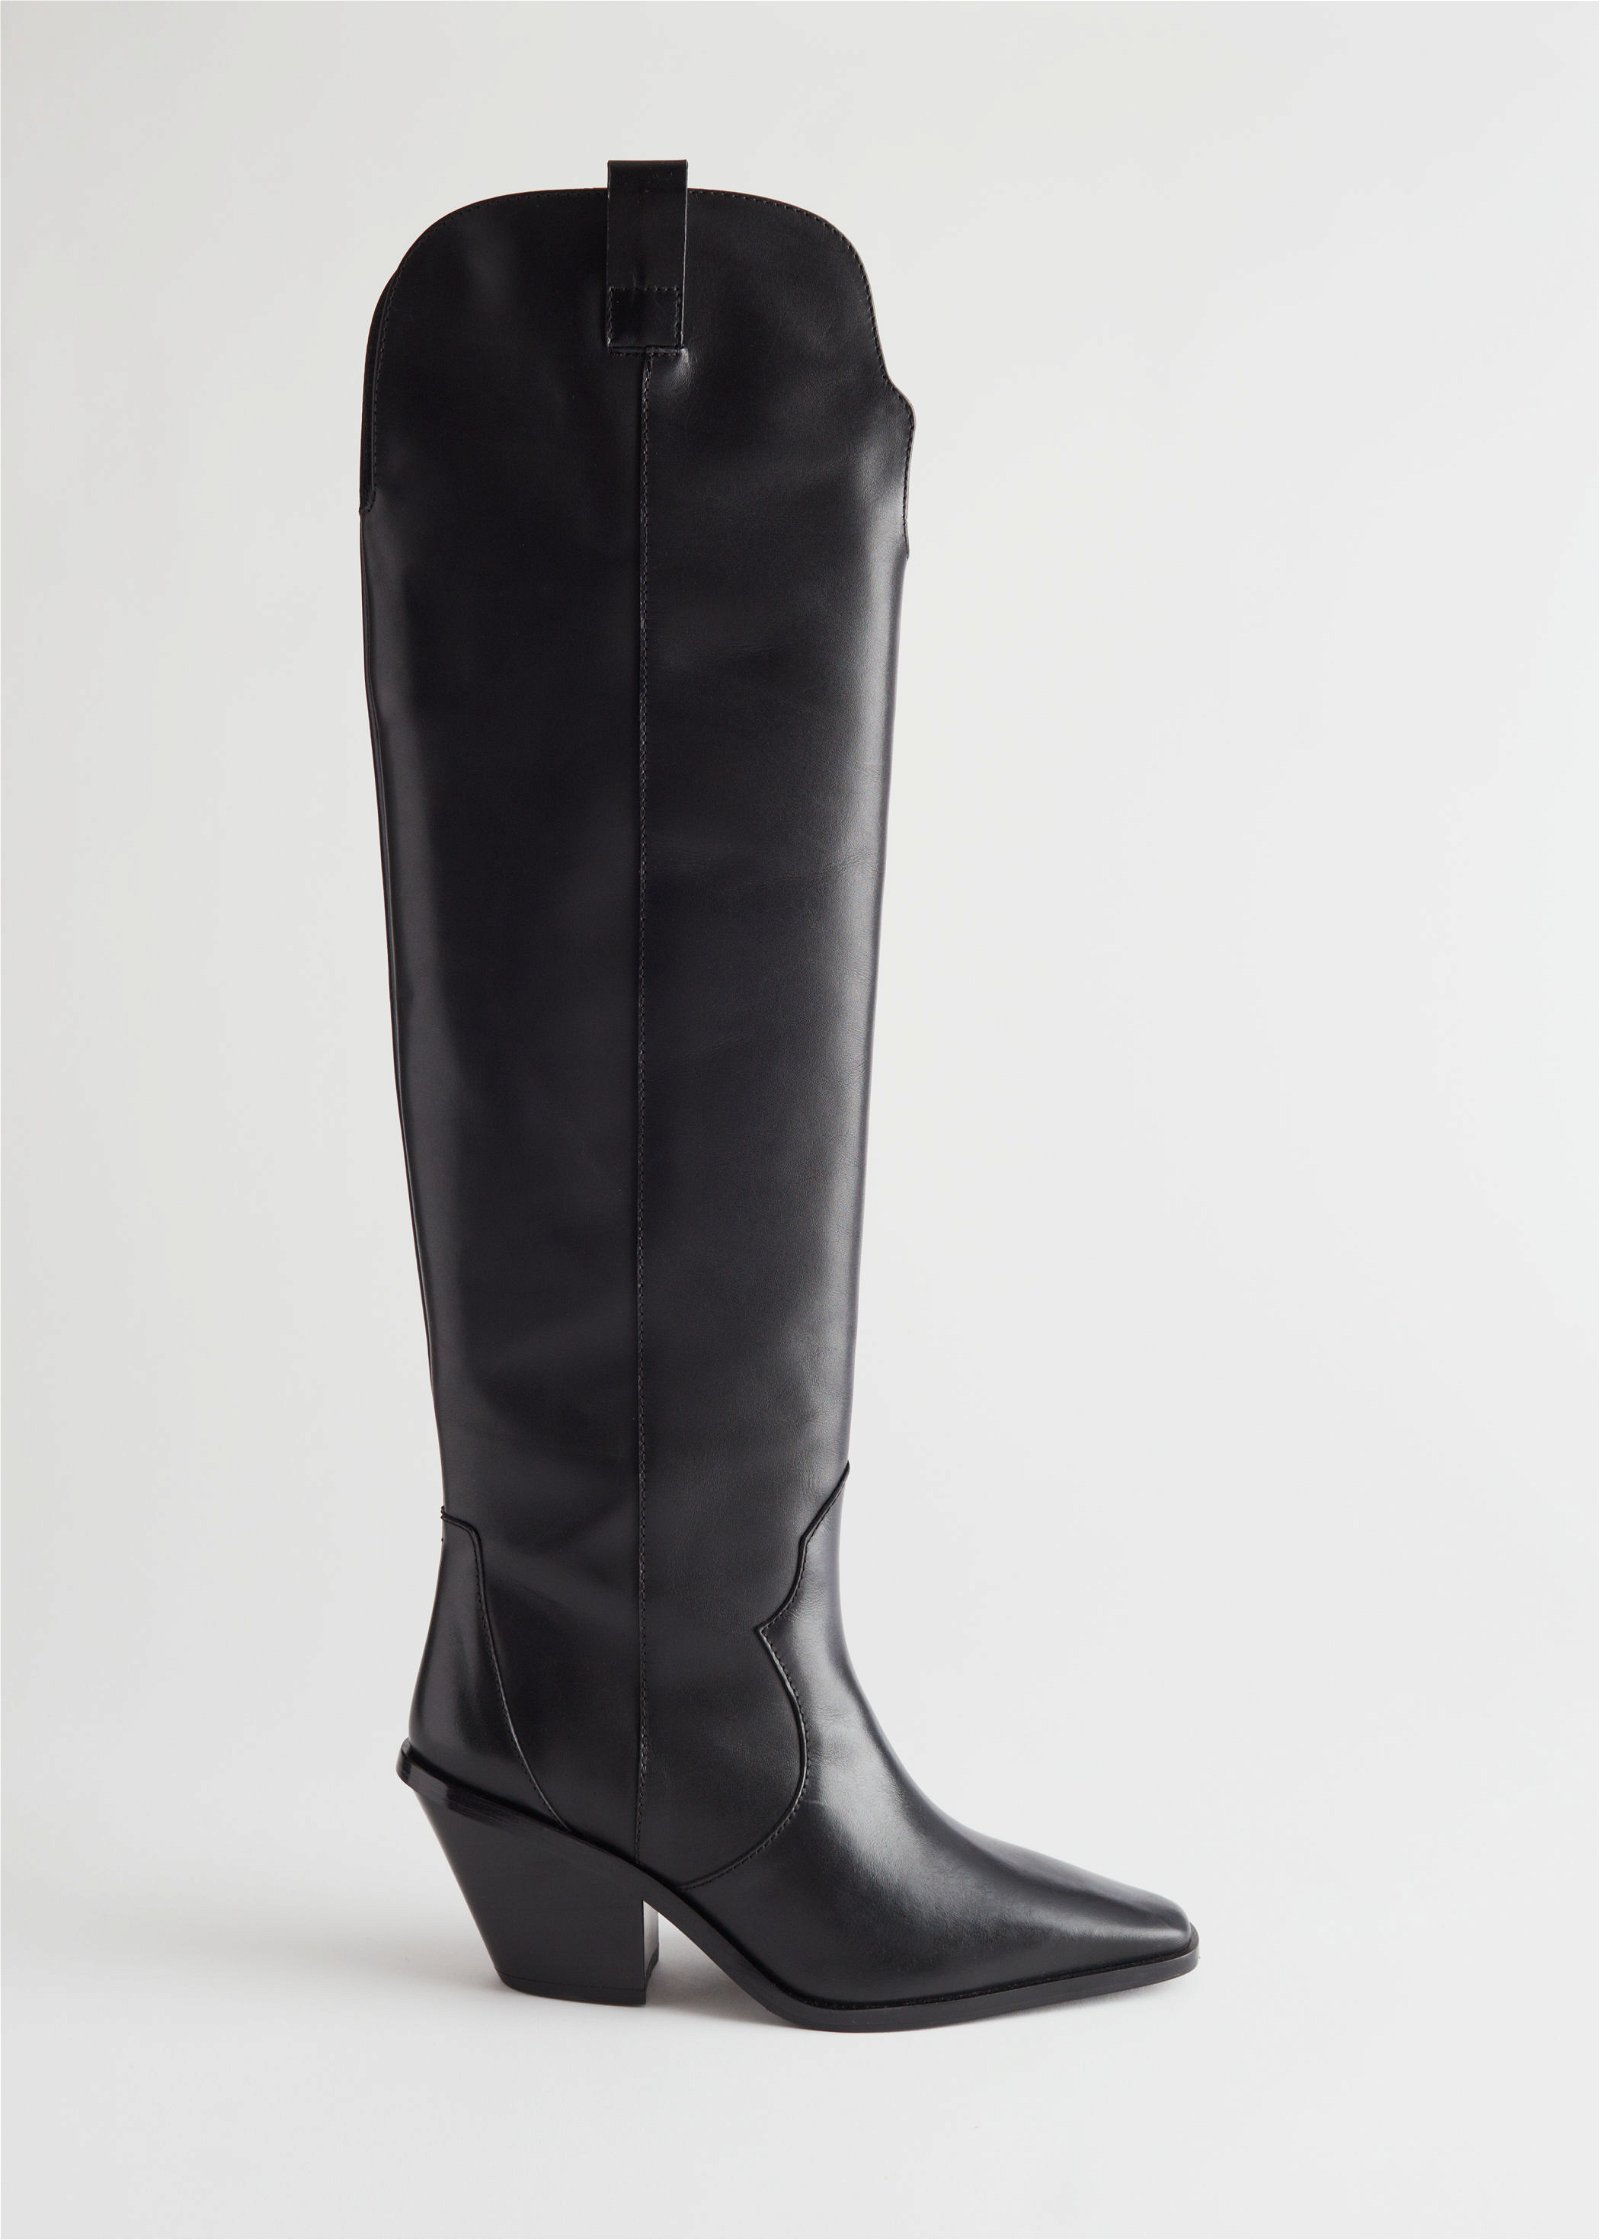 & OTHER STORIES Knee High Leather Cowboy Boots | Endource